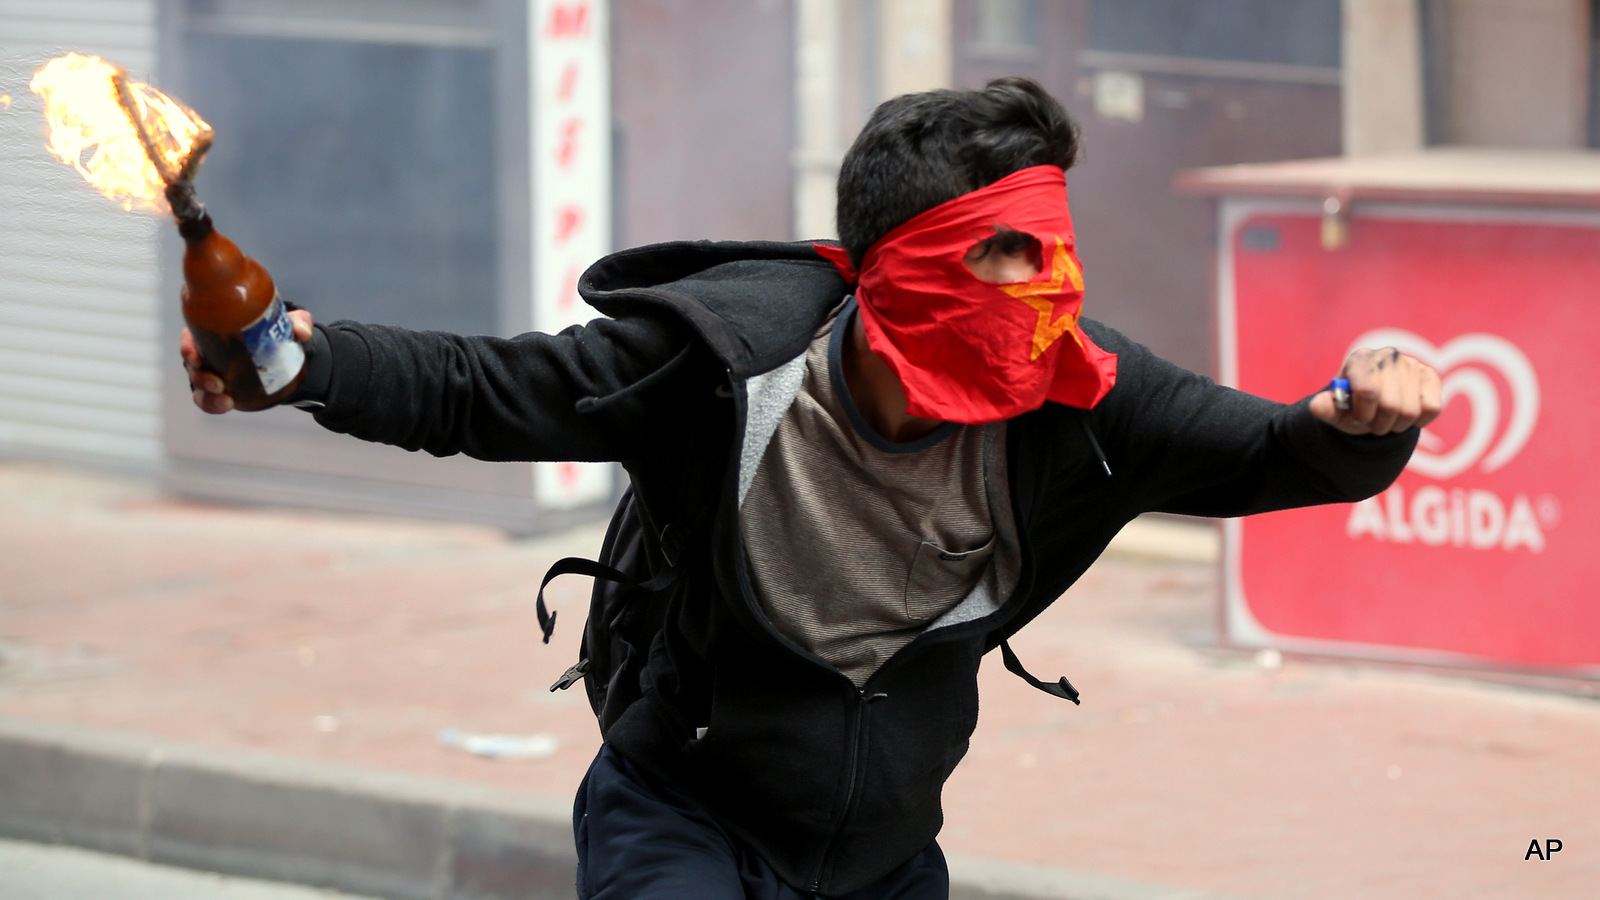 A demonstrator runs to hurl a firebomb towards riot police officers during clashes in Istanbul, Turkey, Friday, May 1, 2015.  Clashes erupted between police and May Day demonstrators in Istanbul on Friday as crowds determined to defy a government ban tried to march to the city's iconic Taksim Square.  Security forces pushed back demonstrators with a water cannon and tear gas. 